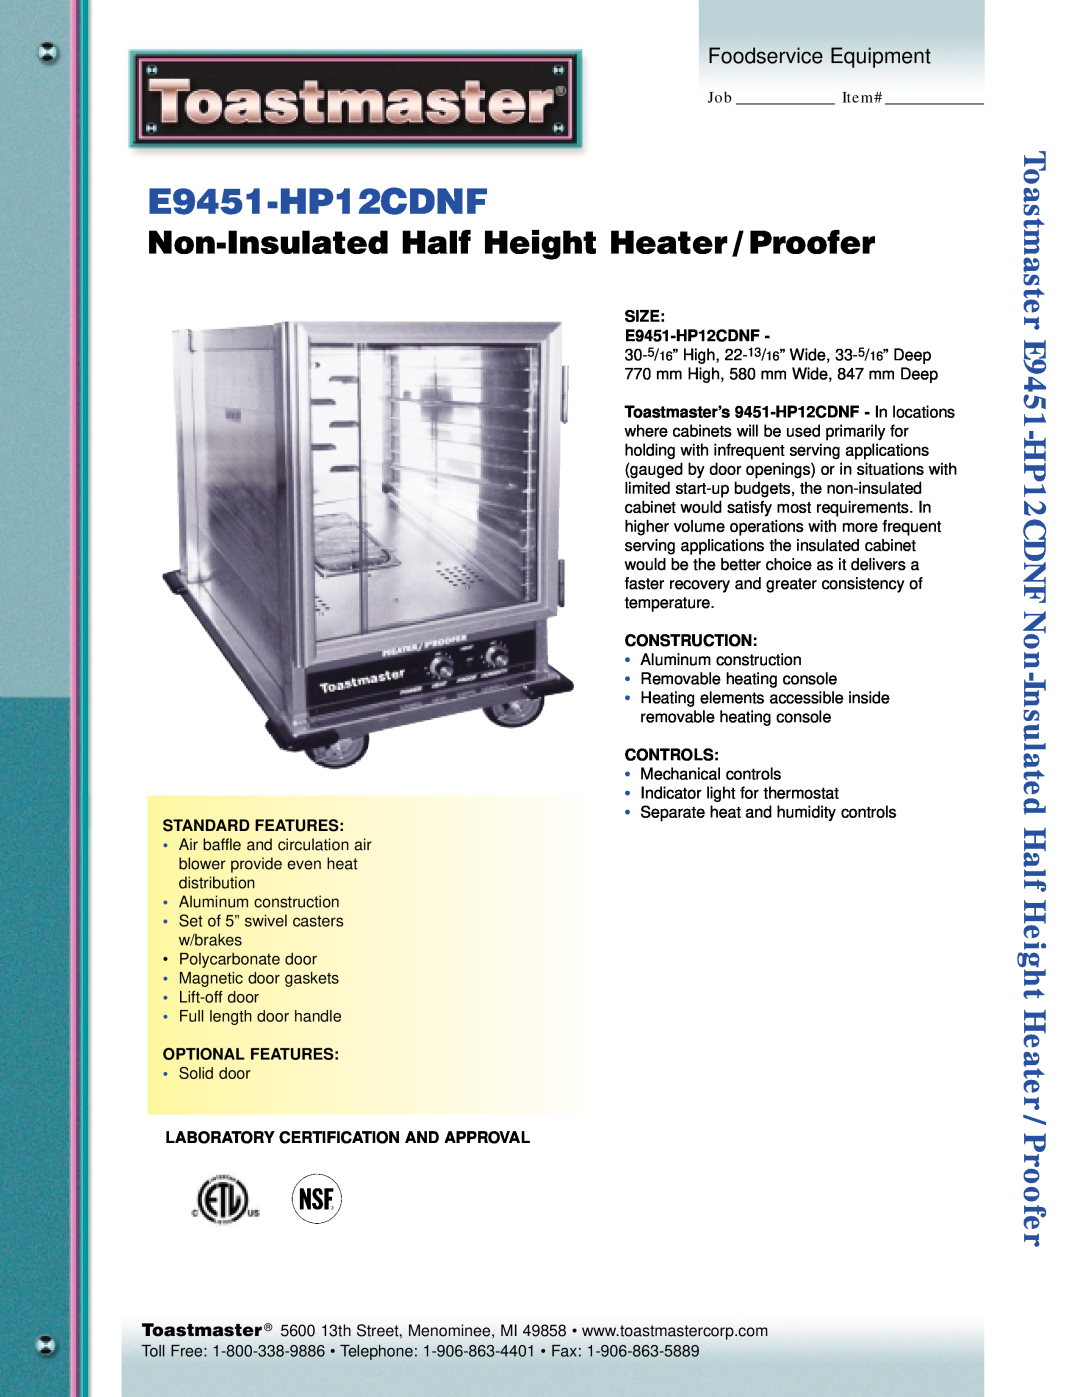 Toastmaster E9451-HP12CDNF manual Non-InsulatedHalf Height Heater / Proofer, Toastmaster, Foodservice Equipment 